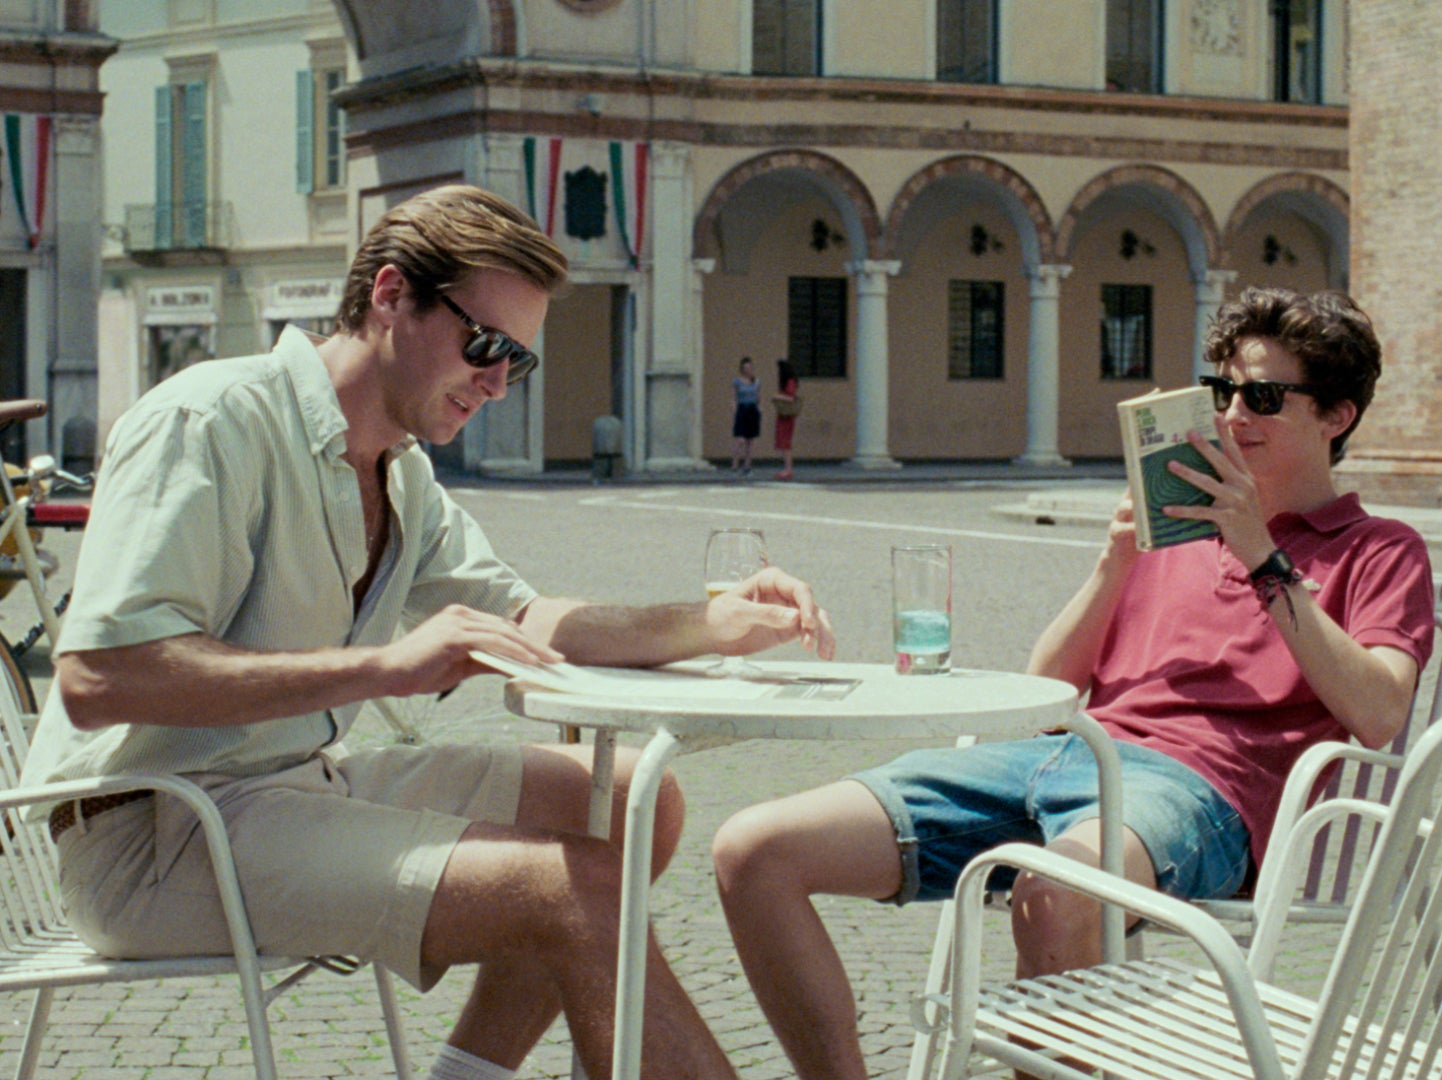 Armie Hammer (left) and Timothee Chalamet (right) in 'Call Me By Your Name'